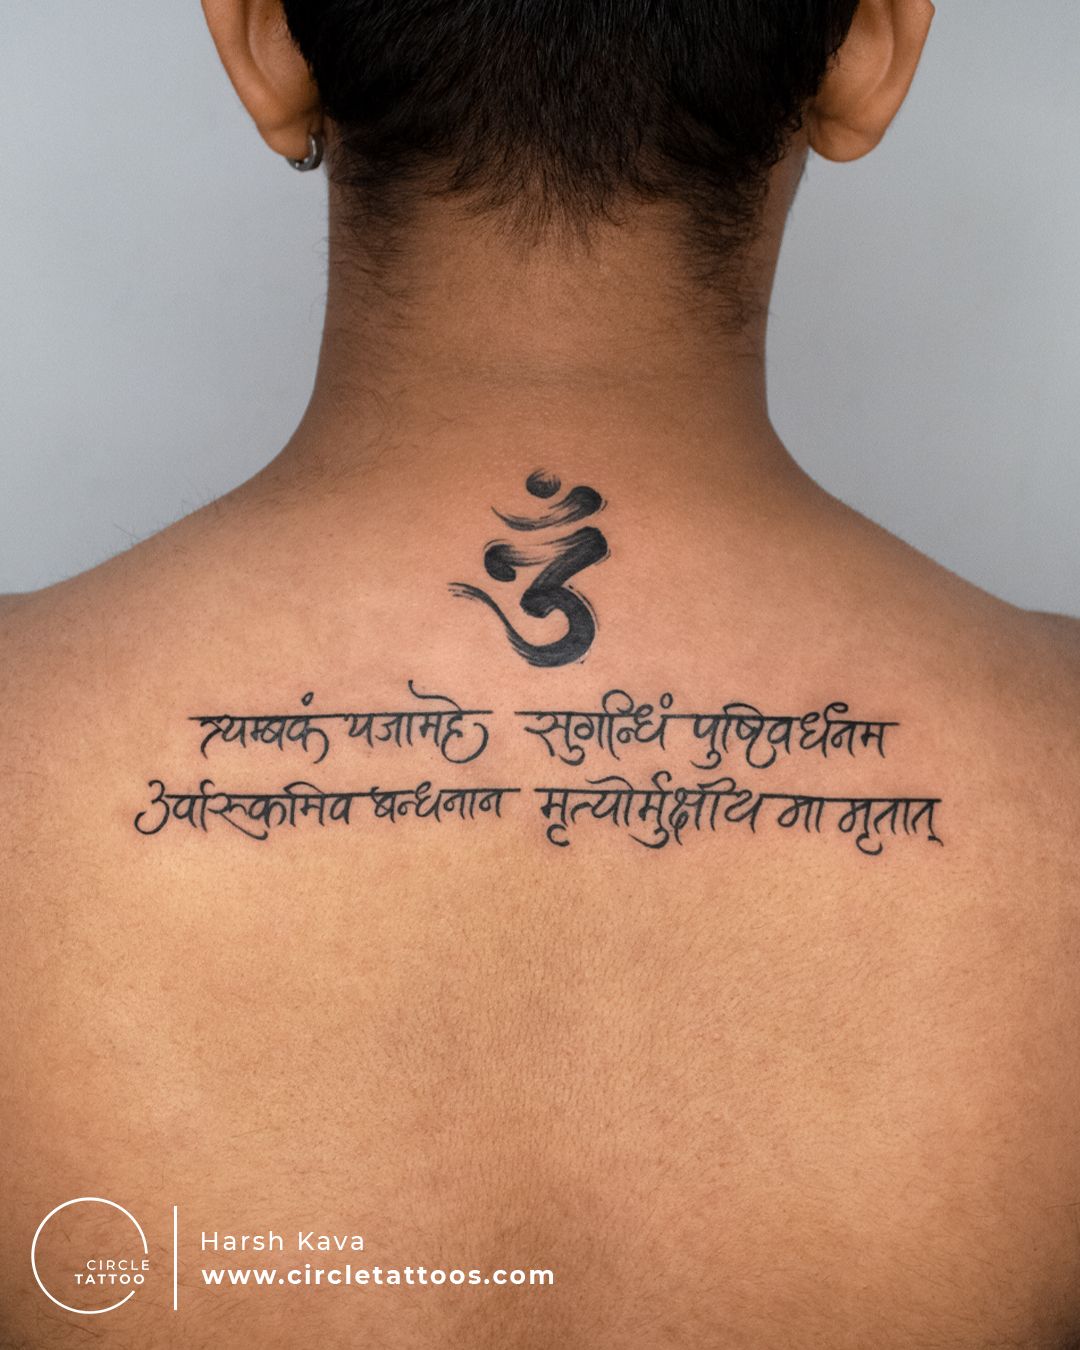 Tattoo Villa - This mantra belongs to Lord Shiva. It is a combination of  three Hindi language words i.e. 'Maha', which means great, 'Mrityun' means  death and 'Jaya' means victory, which turns